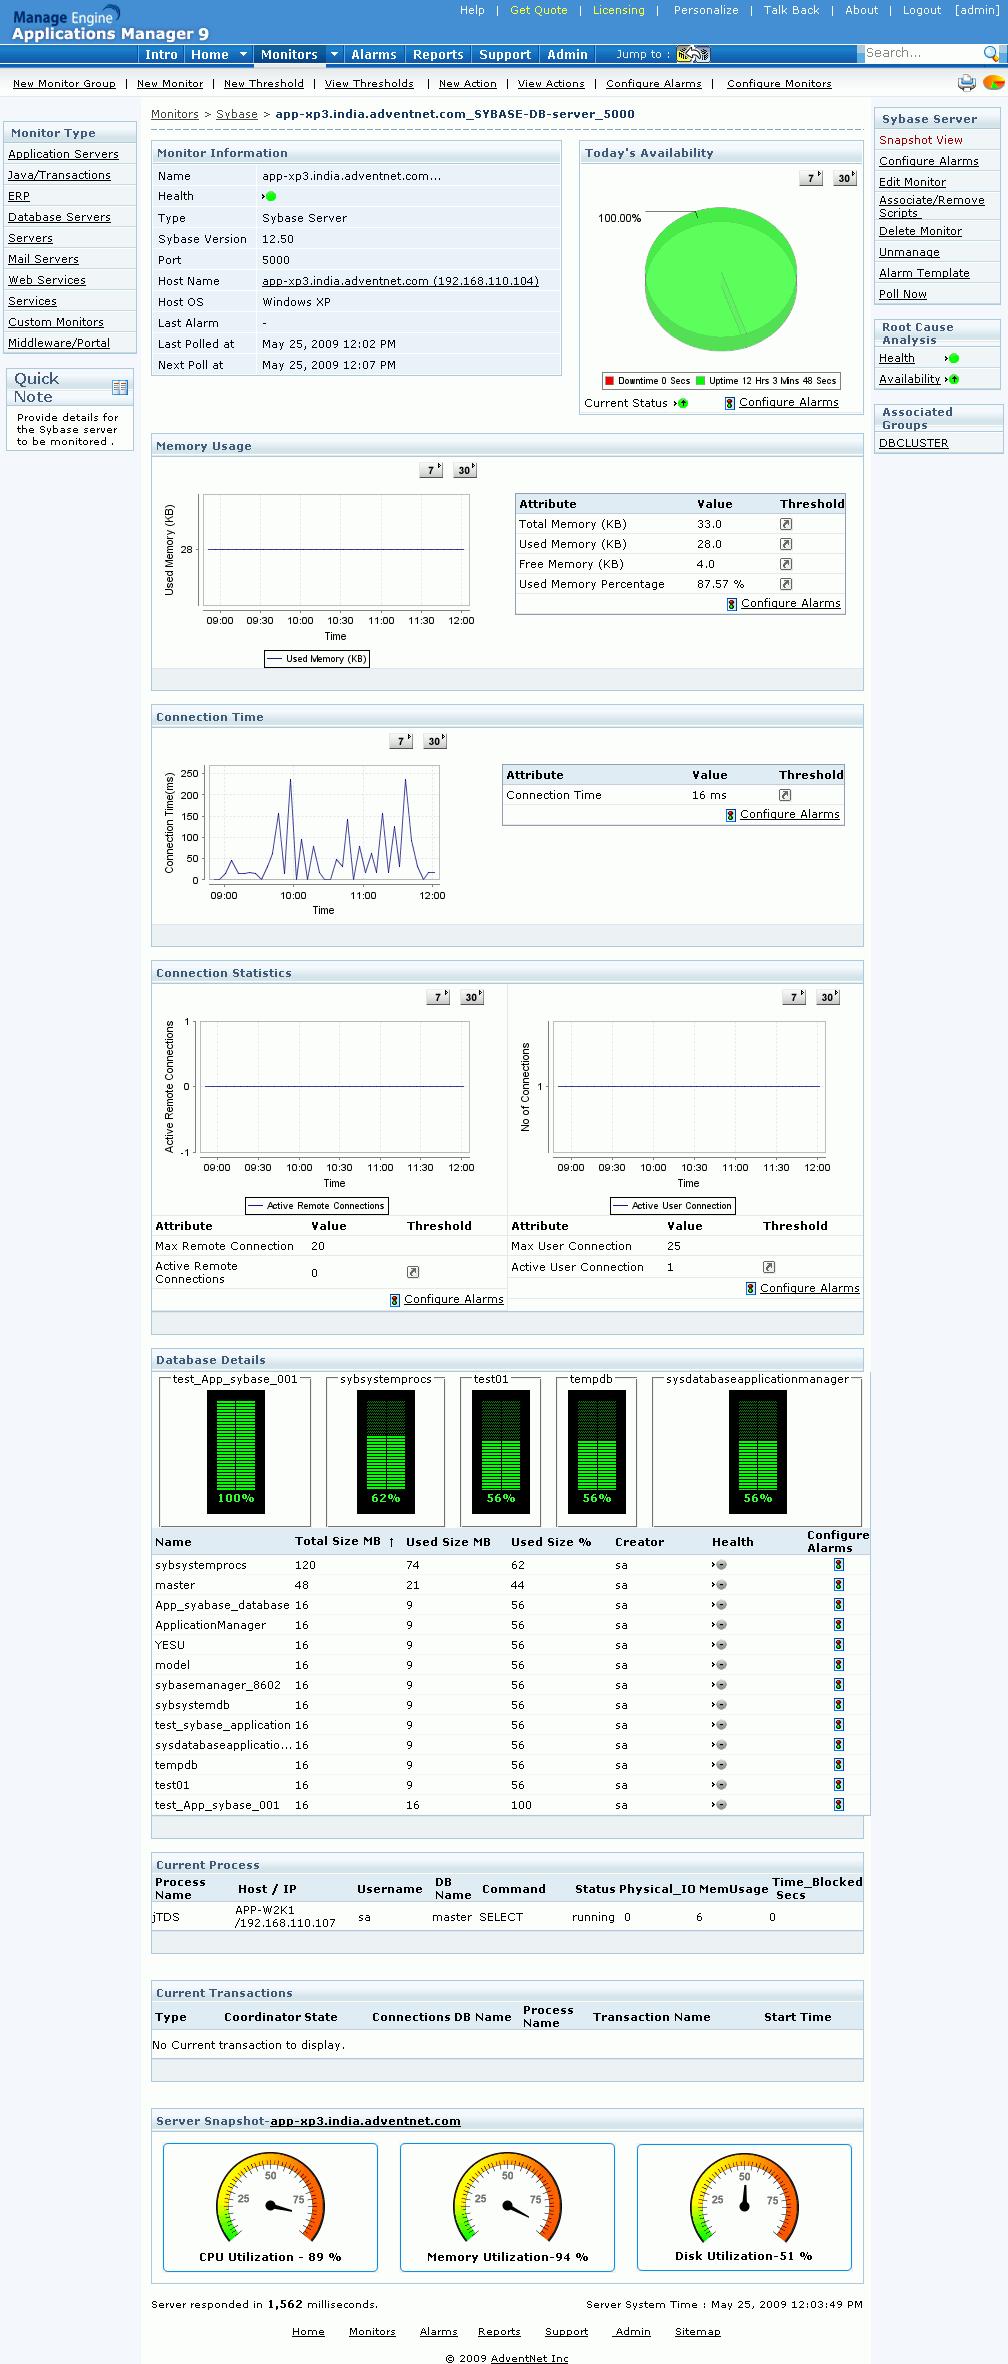 Databases Sybase Response time, health, and availability